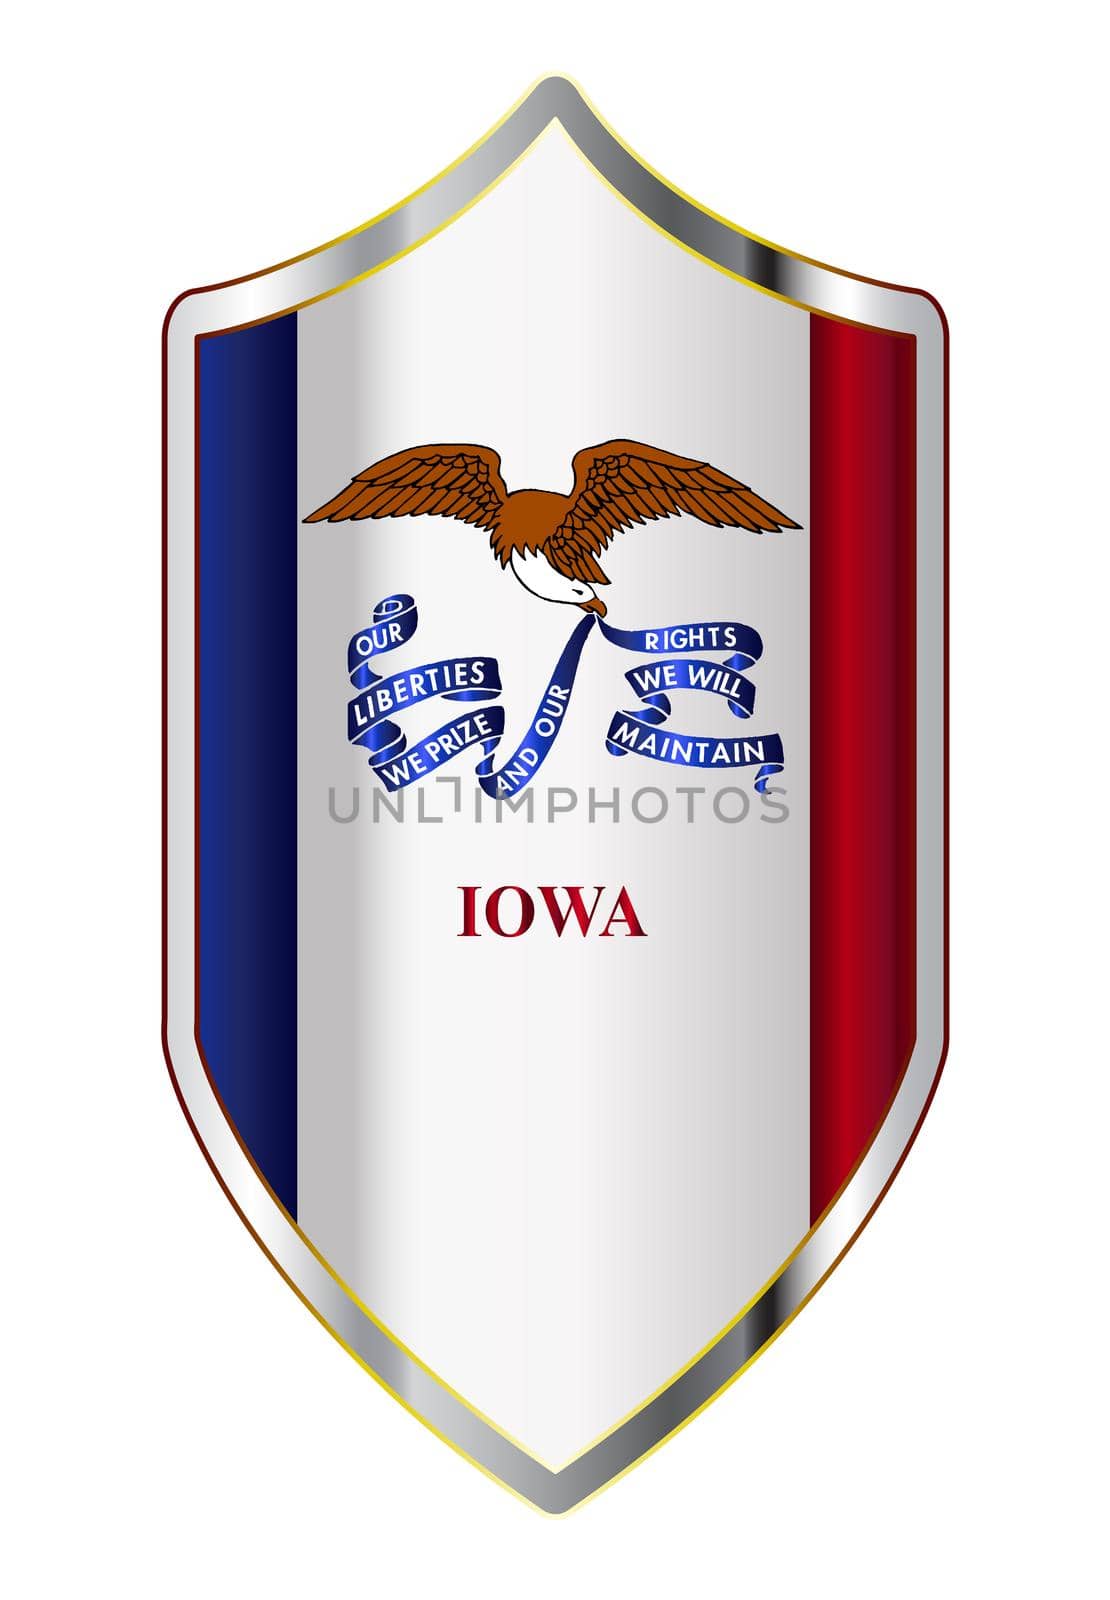 A typical crusader type shield with the state flag of Iowa all isolated on a white background